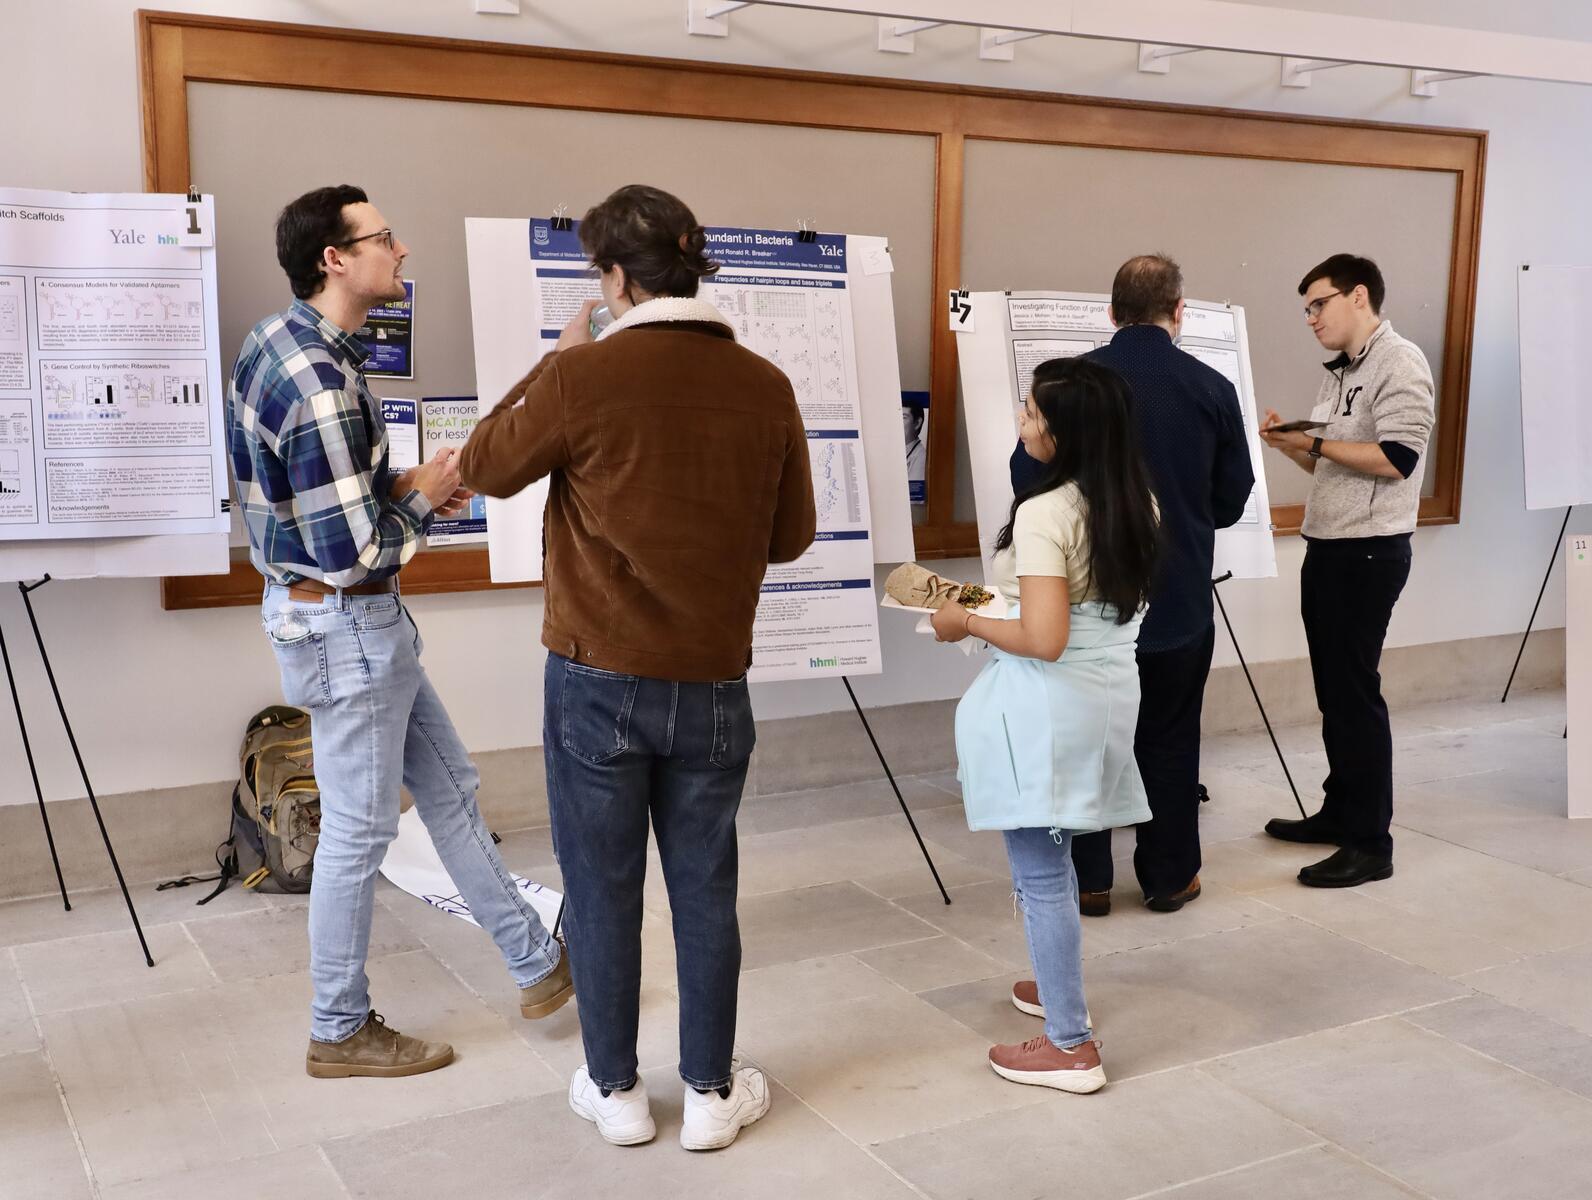 People chatting near research posters